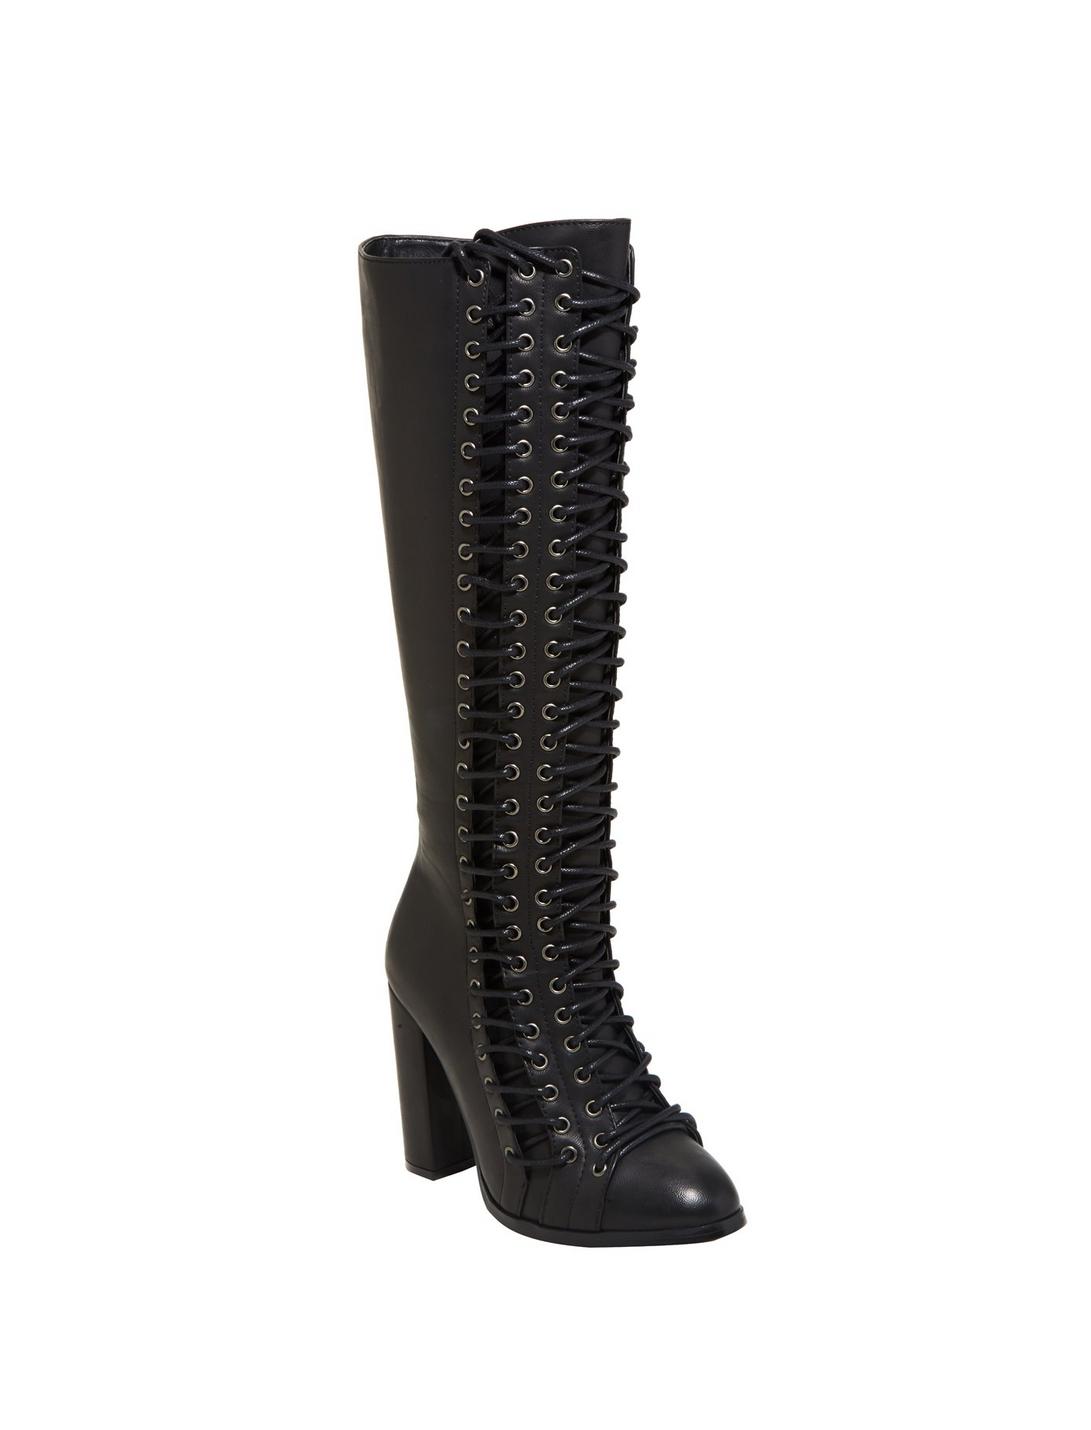 Triple Lace-Up Over-The-Knee Boots, BLACK, hi-res